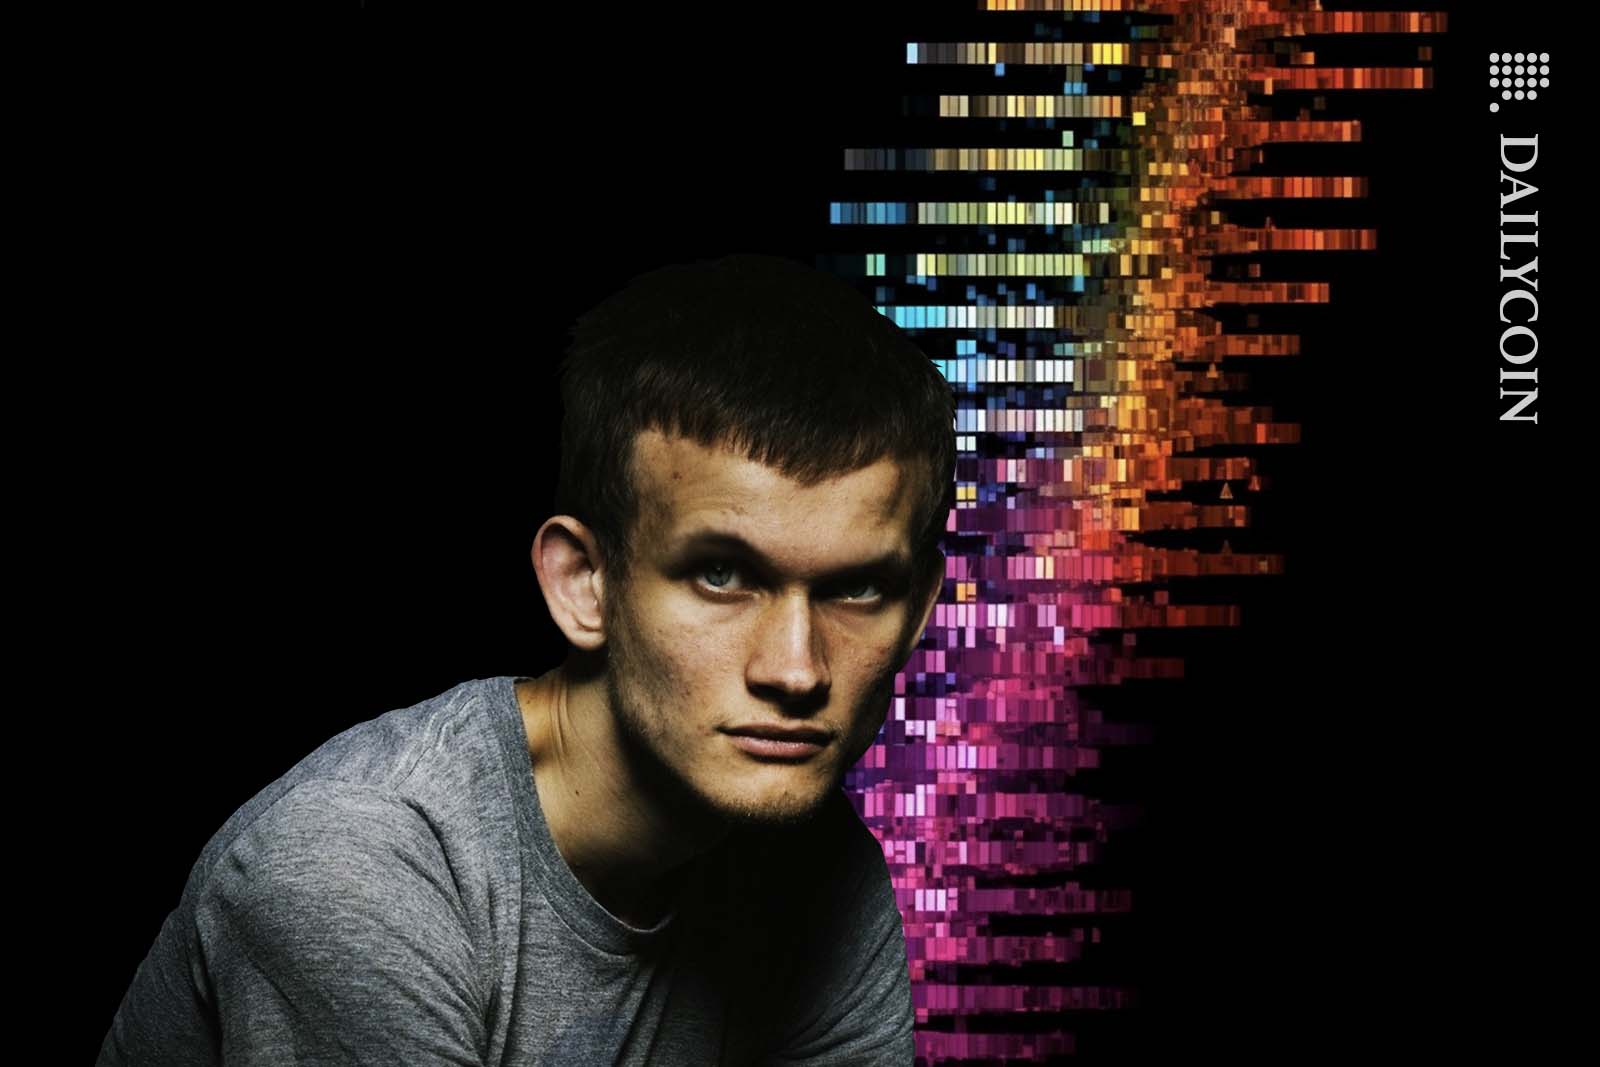 Vitalik Buterin posing infront of and abstract DNA code structure.